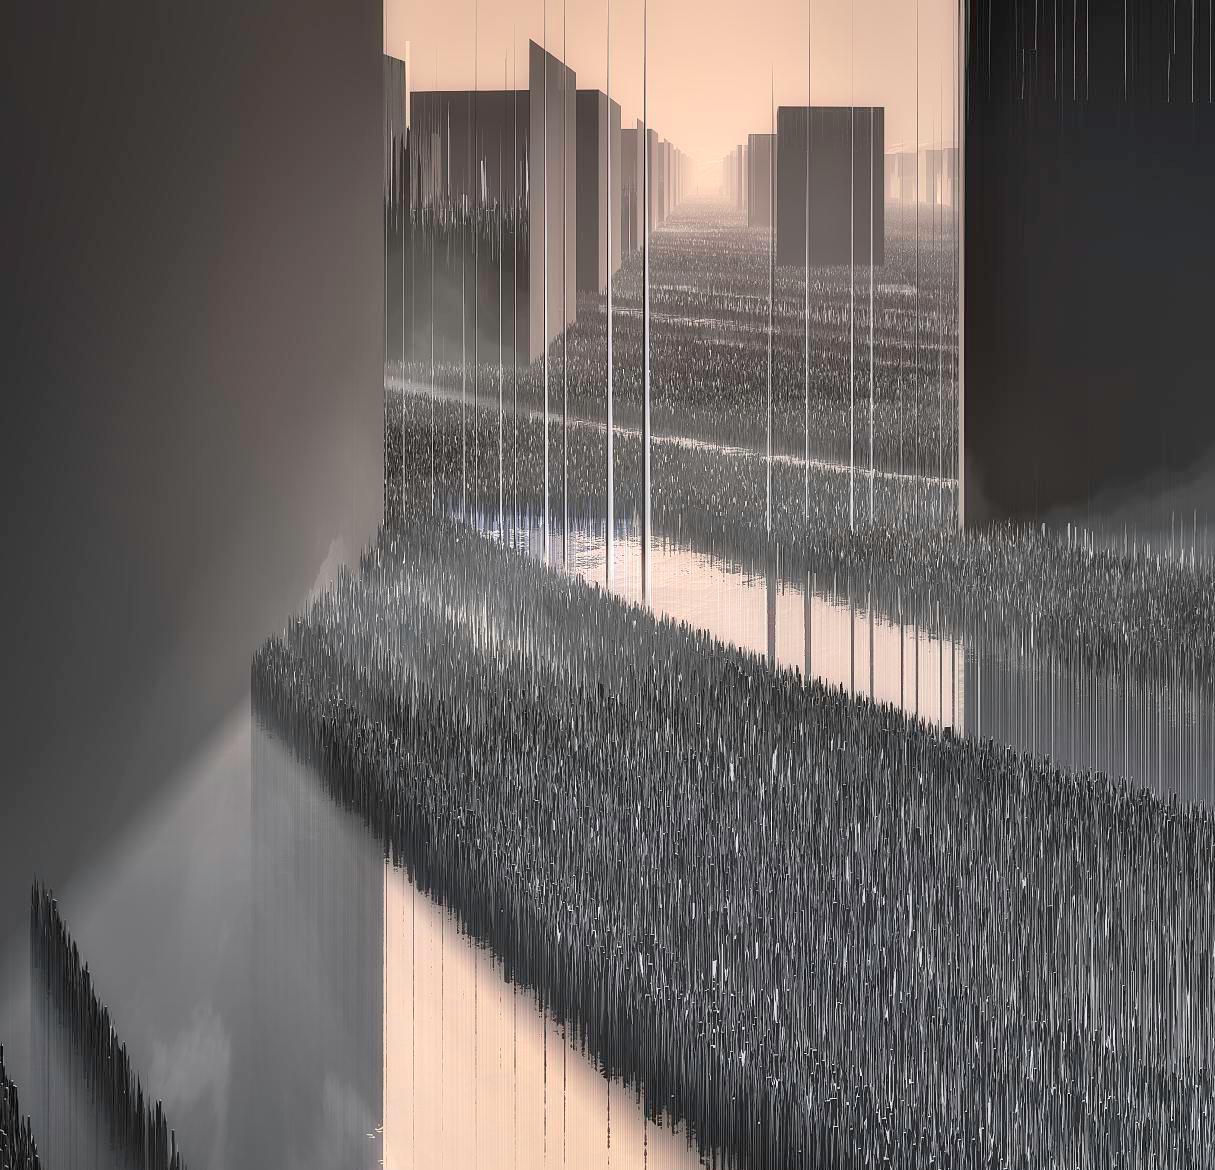 City Landcuts - Vision of a Urban Territory - Abstract Cityscapes - Gray Color Photograph by Paul-Émile Rioux